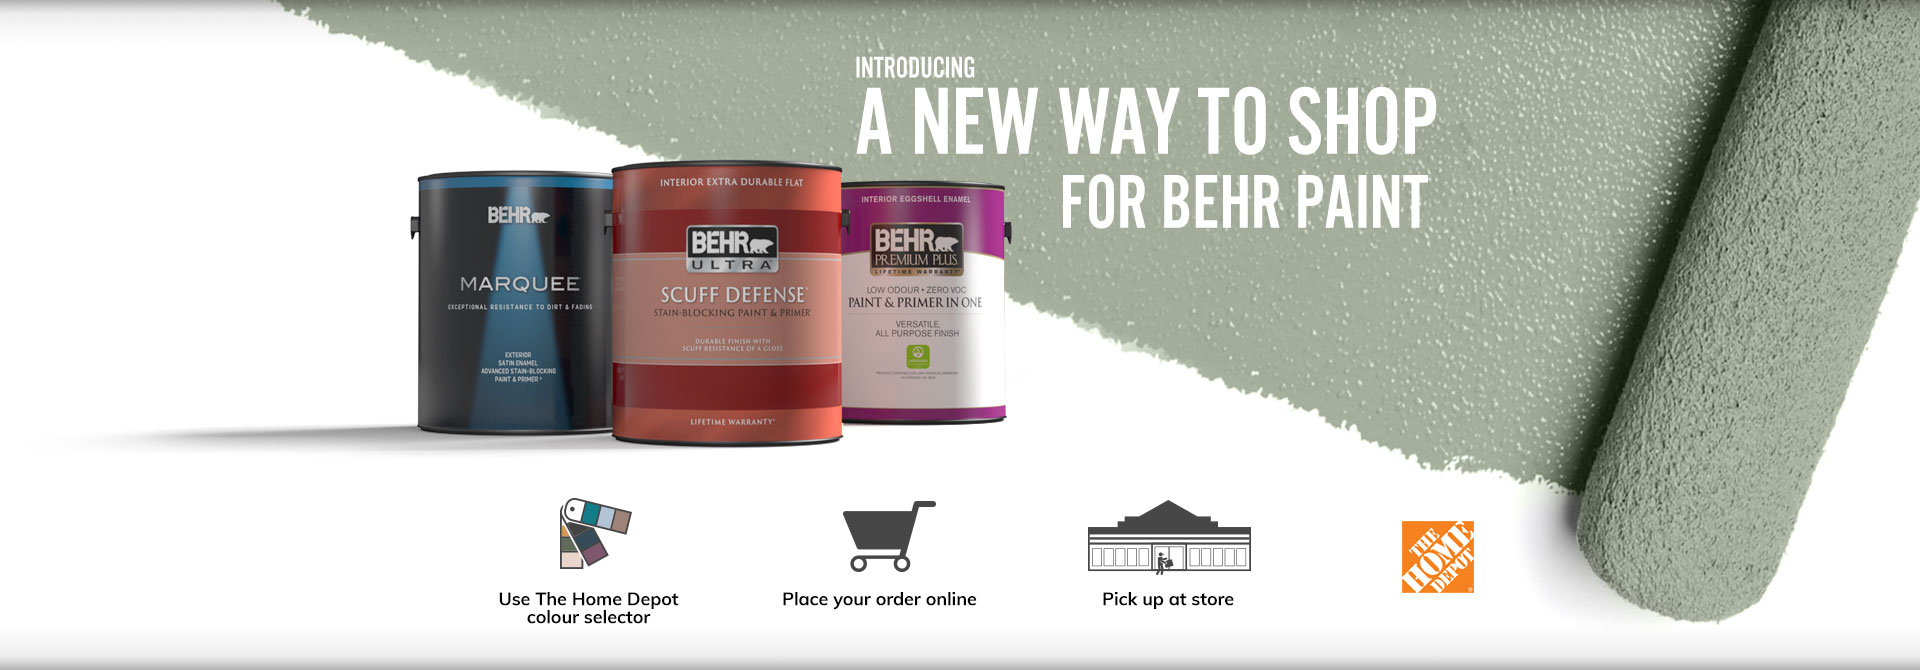 Behr Interior paint cans with a paint roller in the background and text overlay that says Introducing a new way to shop for Behr Paint.